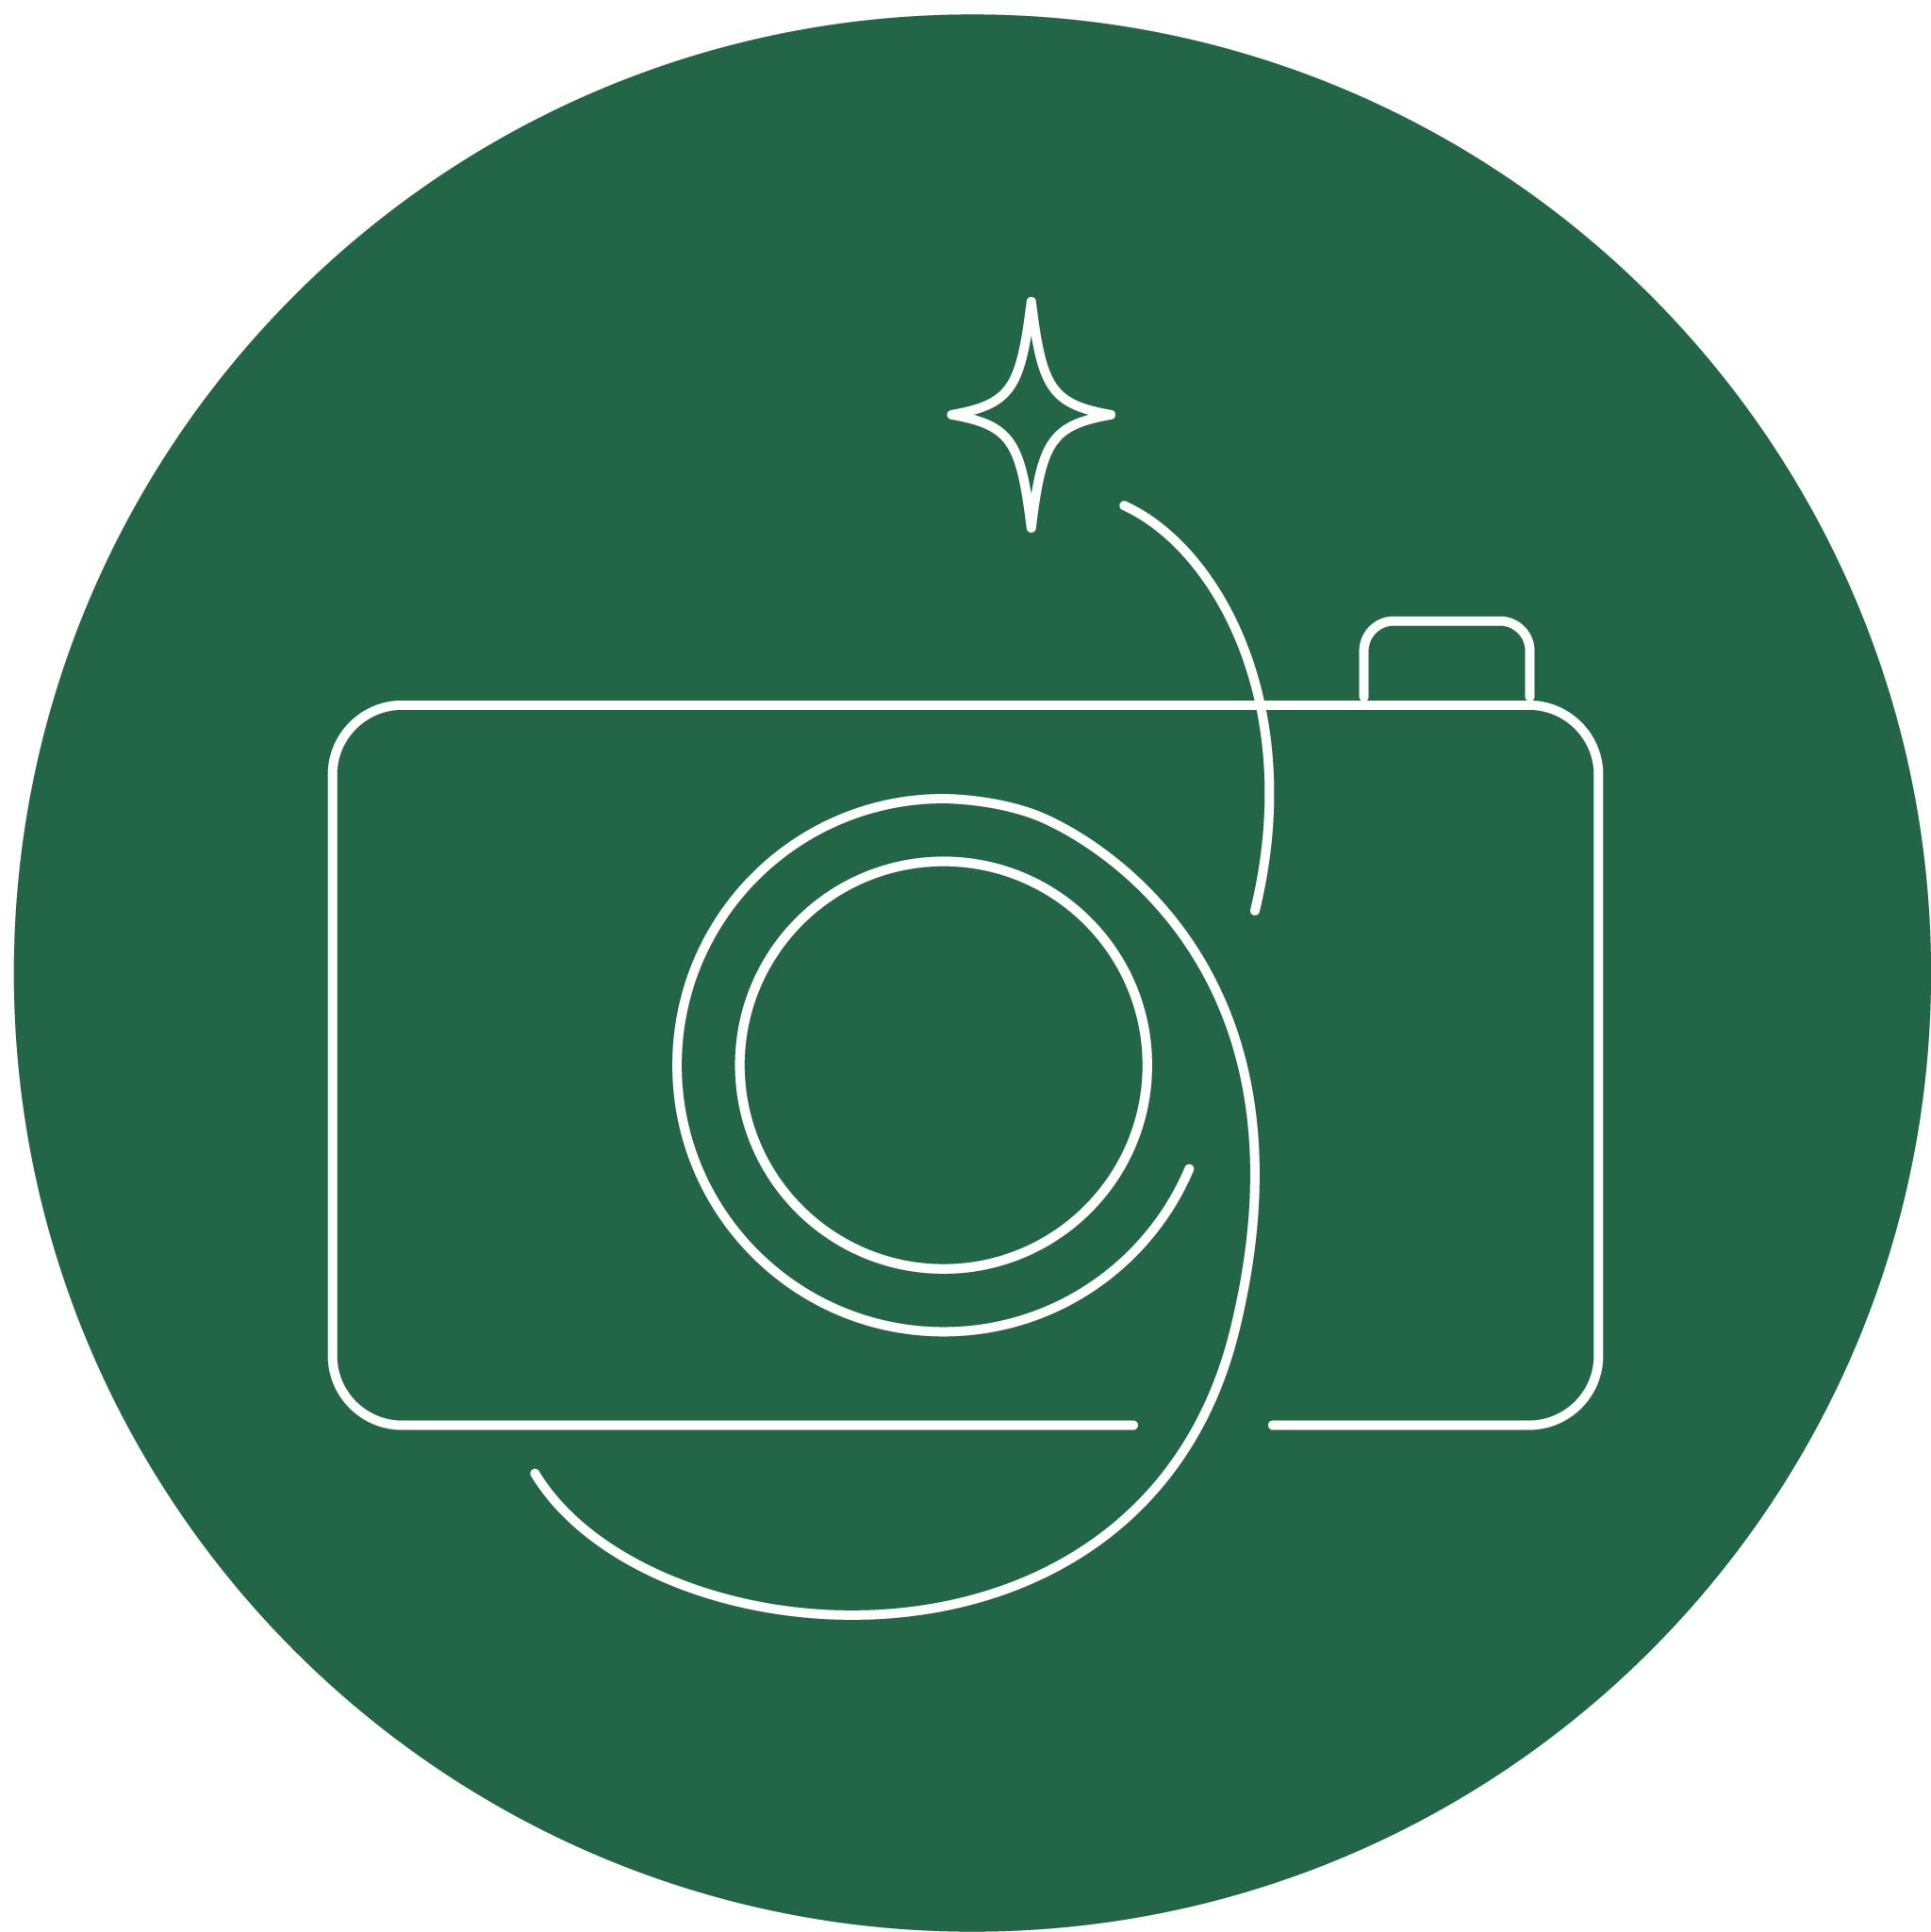 Icon for photography. A camera with trail and a star on a green background. Mostly works as decoration on about me page.